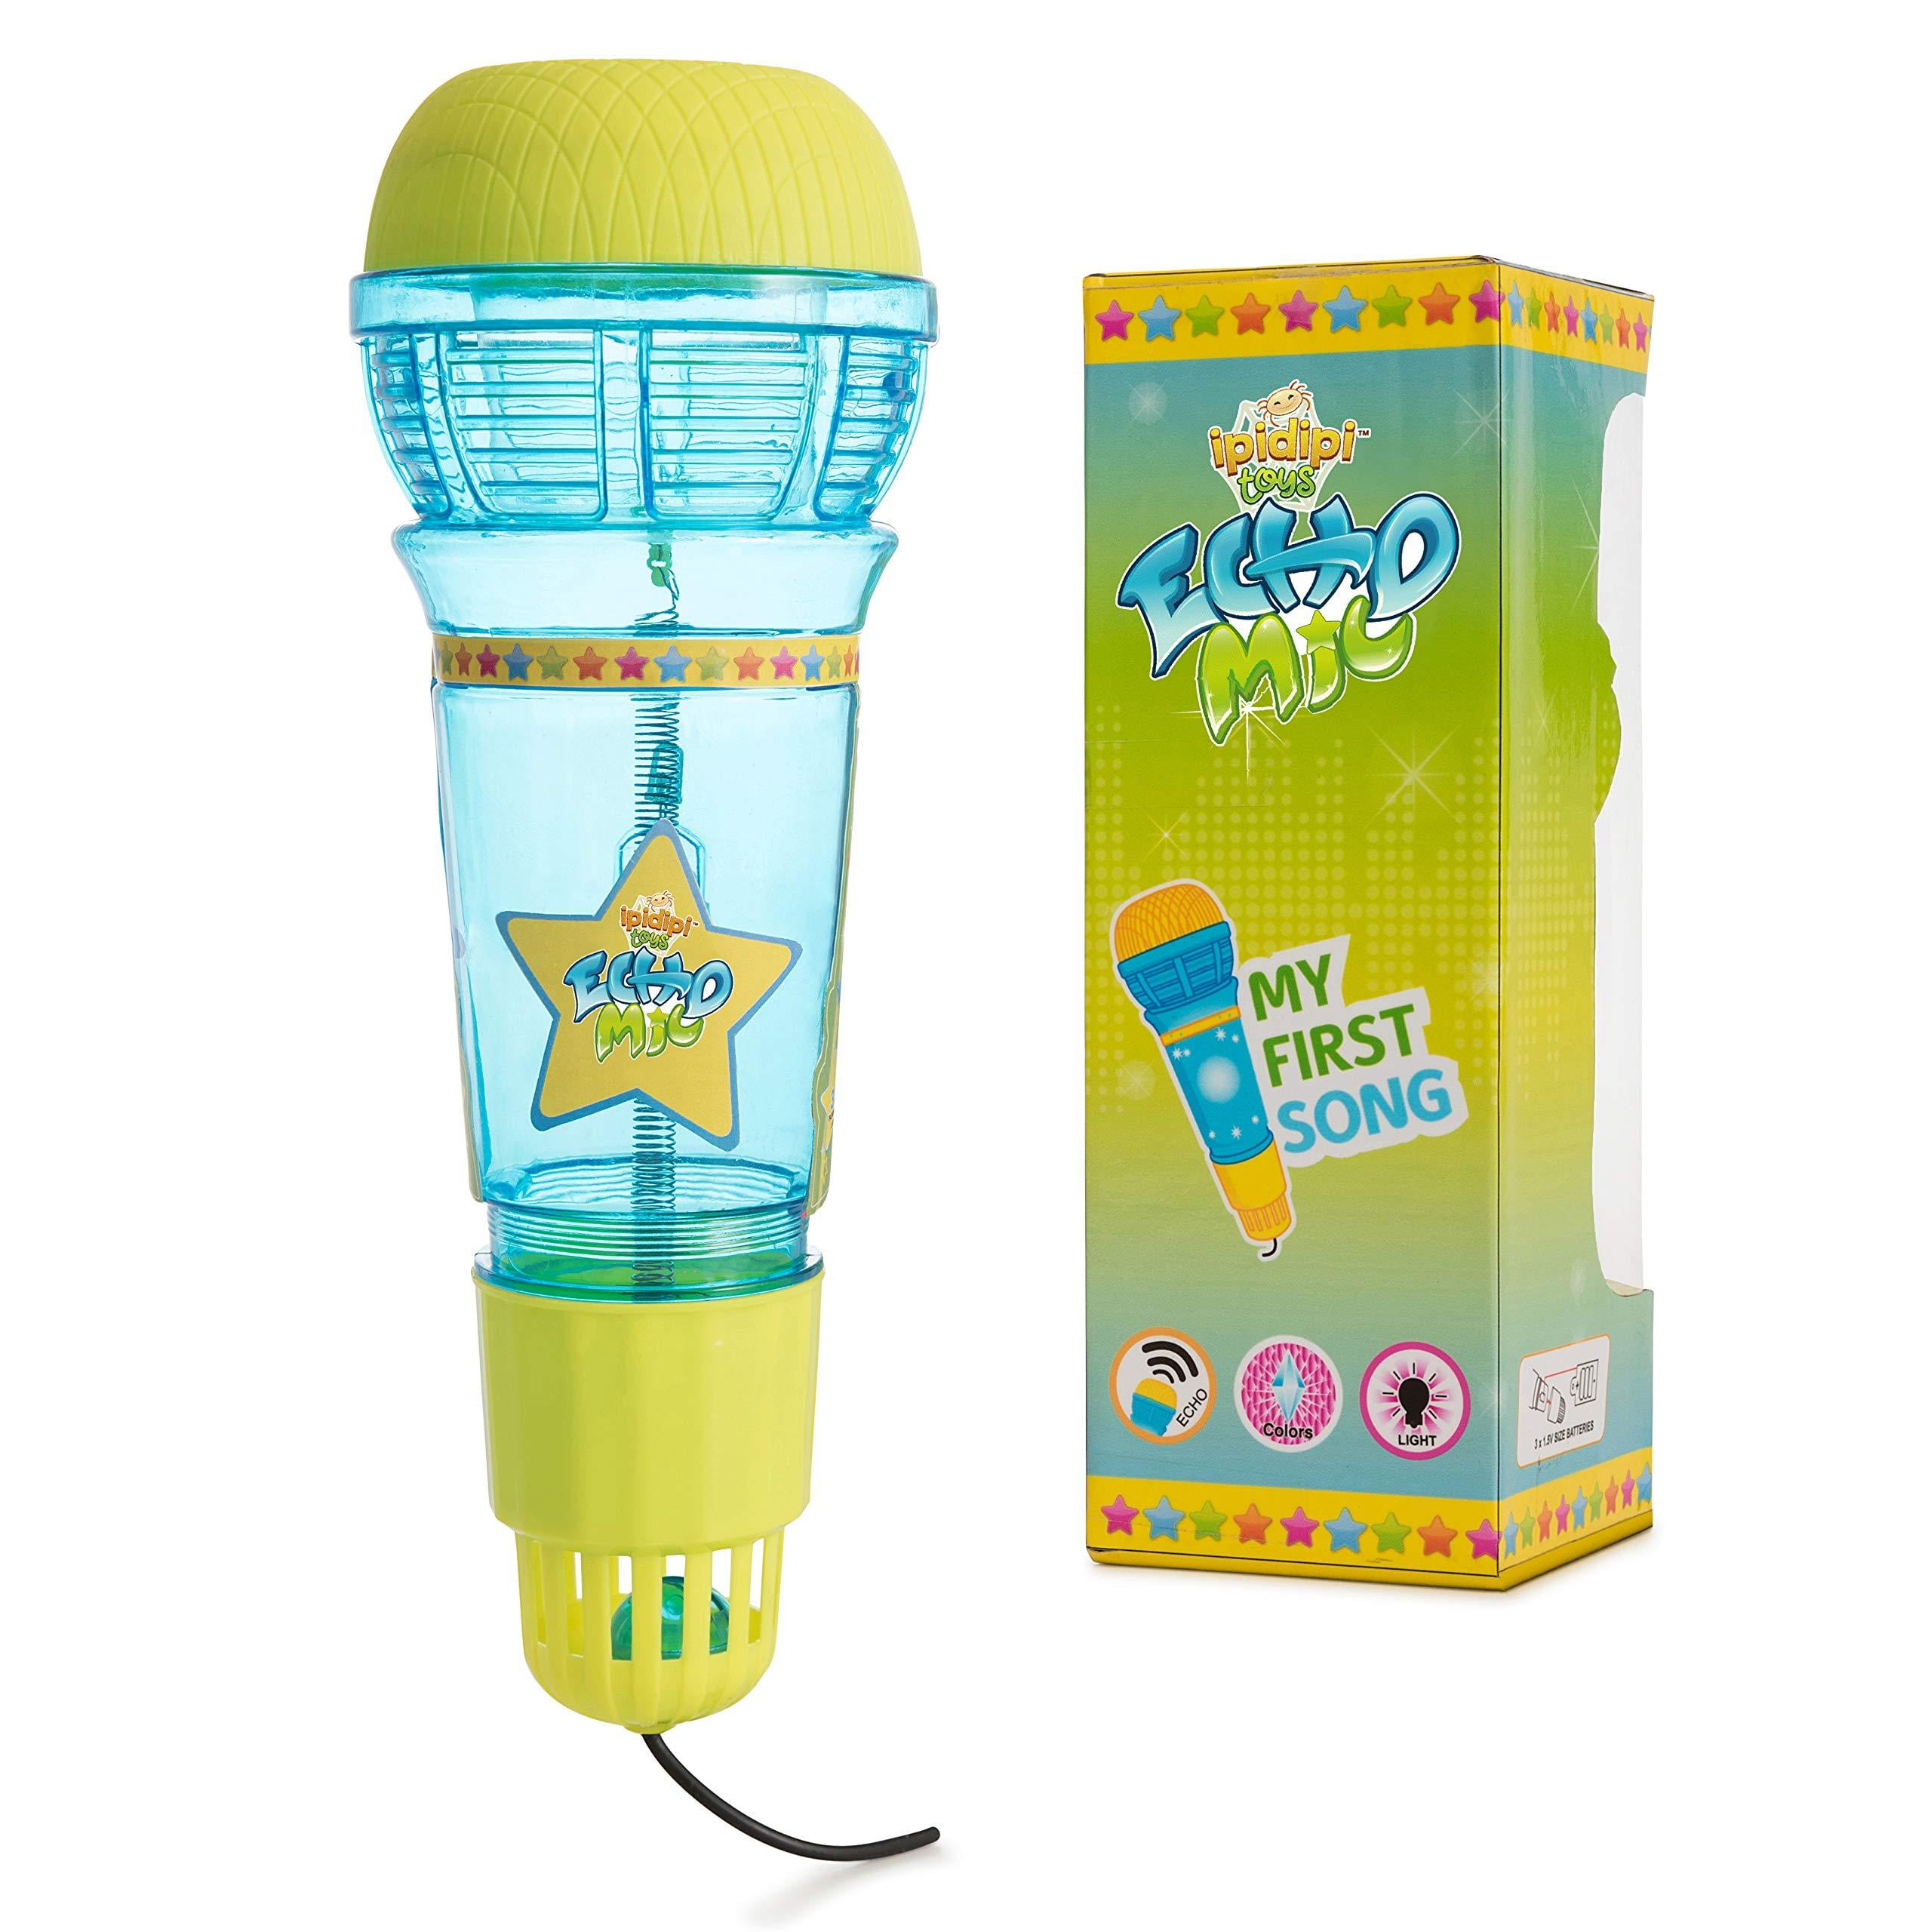 Echo Microphone Mic Voice Changer Toy Gift Birthday Present Kids Party Song BR 